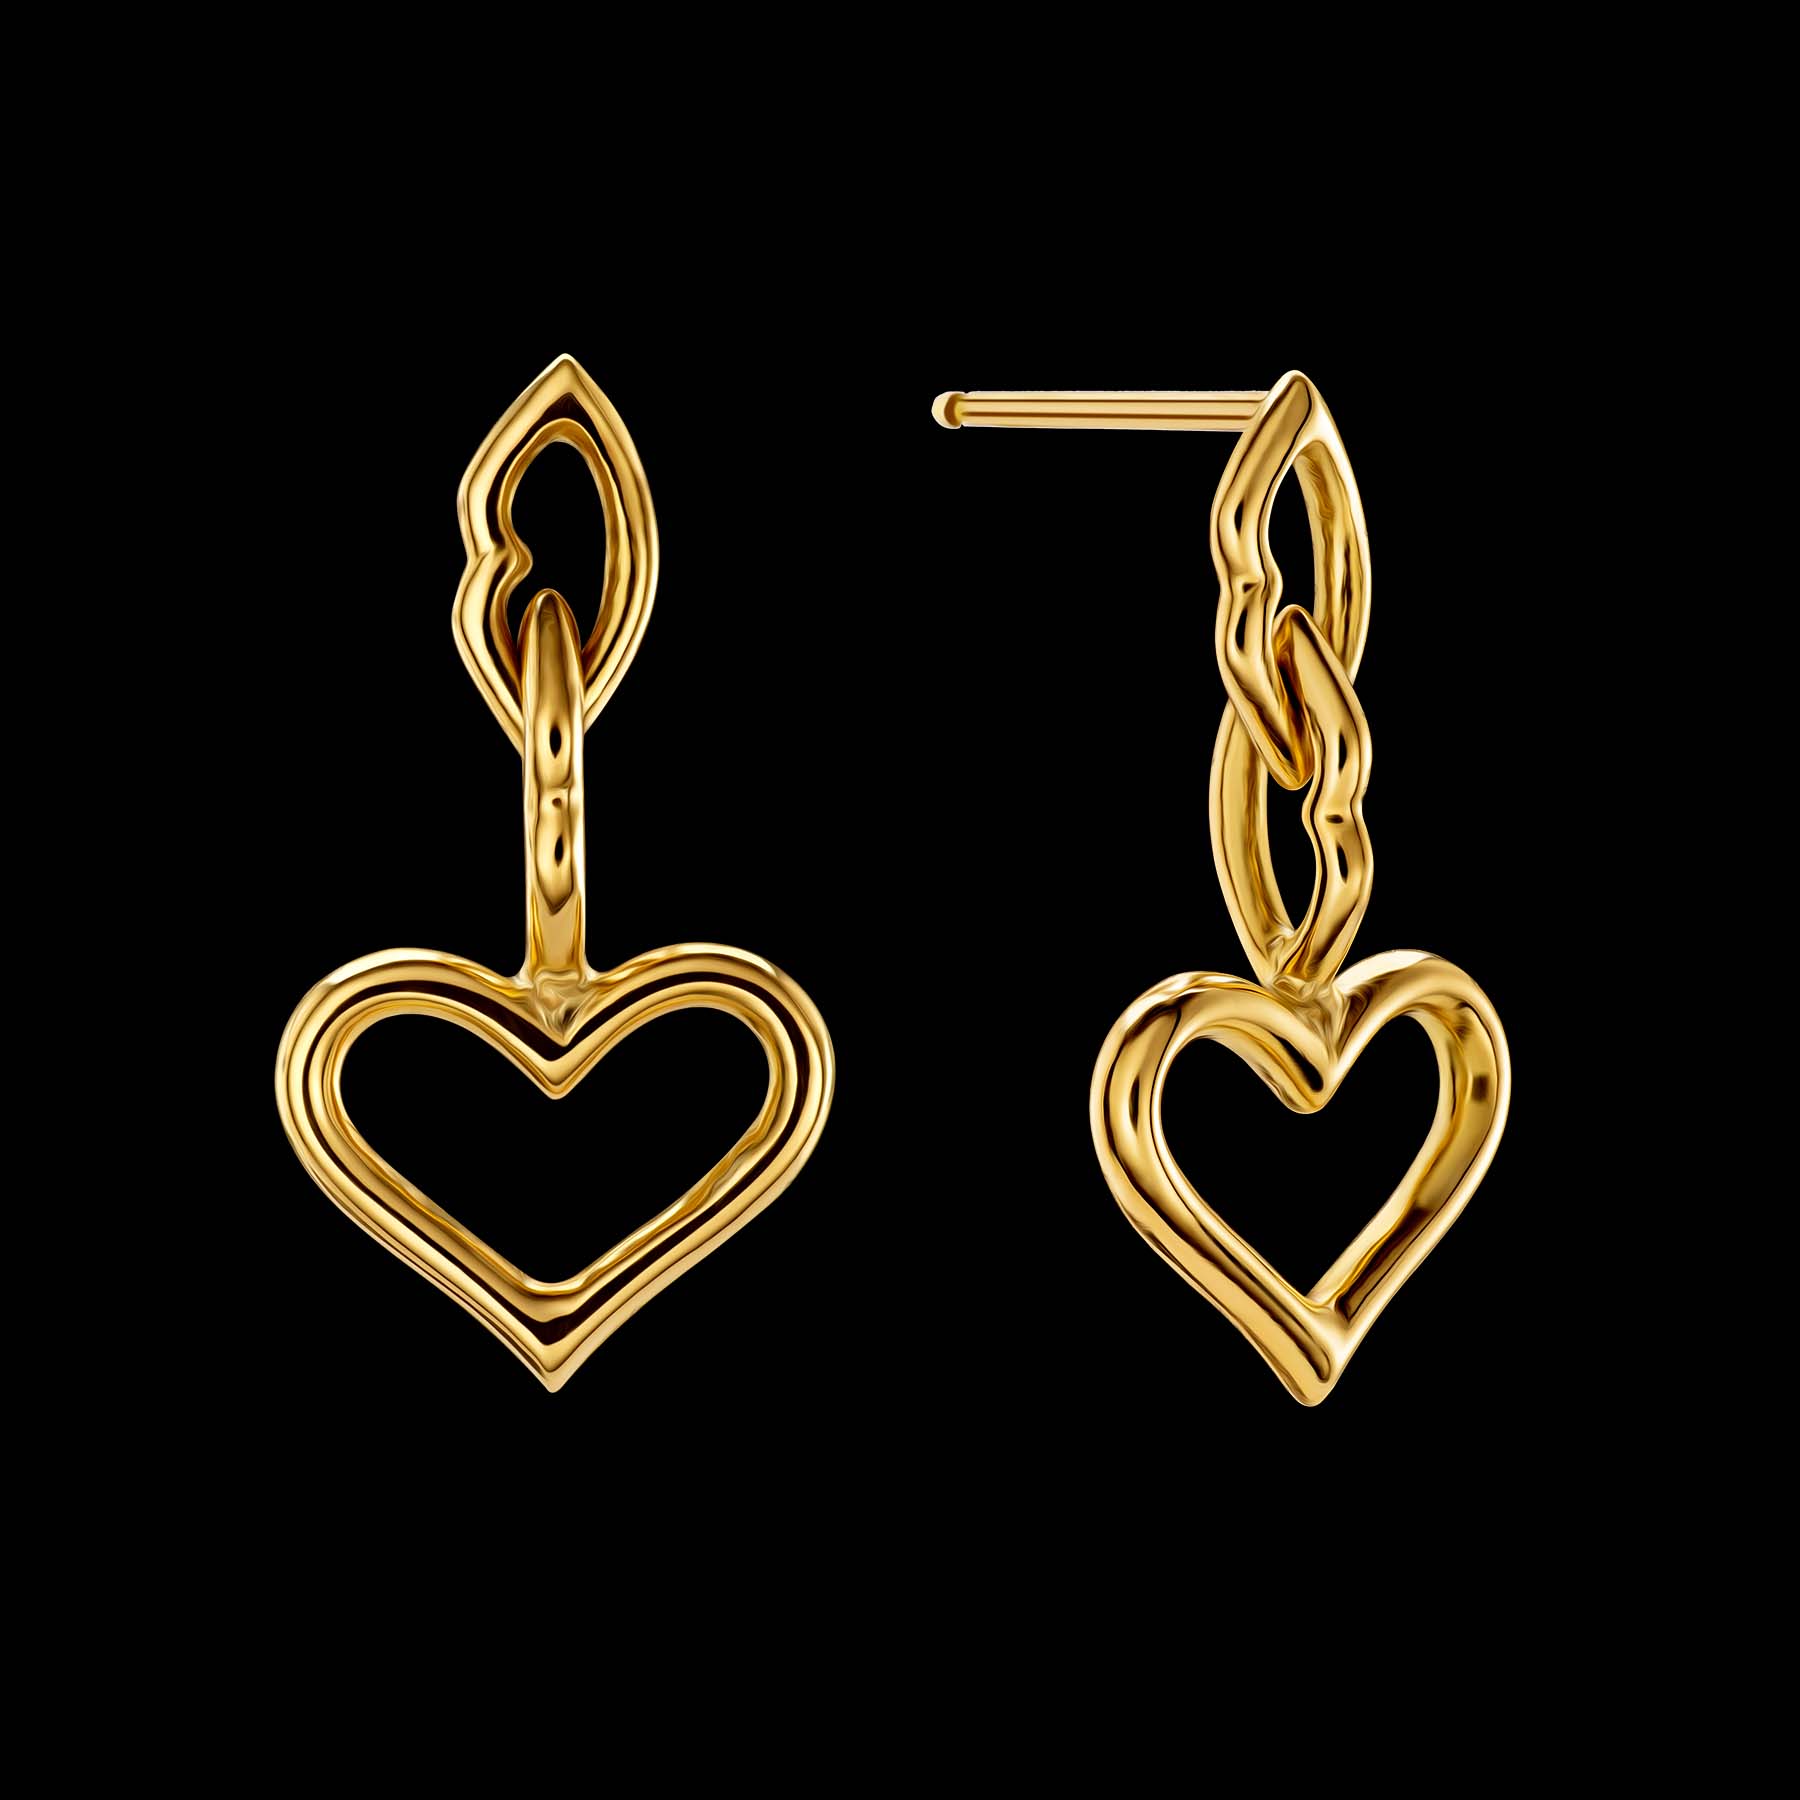 The Love and Kisses chain Earrings by designer Solange Azagury-Partridge - 18 carat Yellow Gold - front view 1